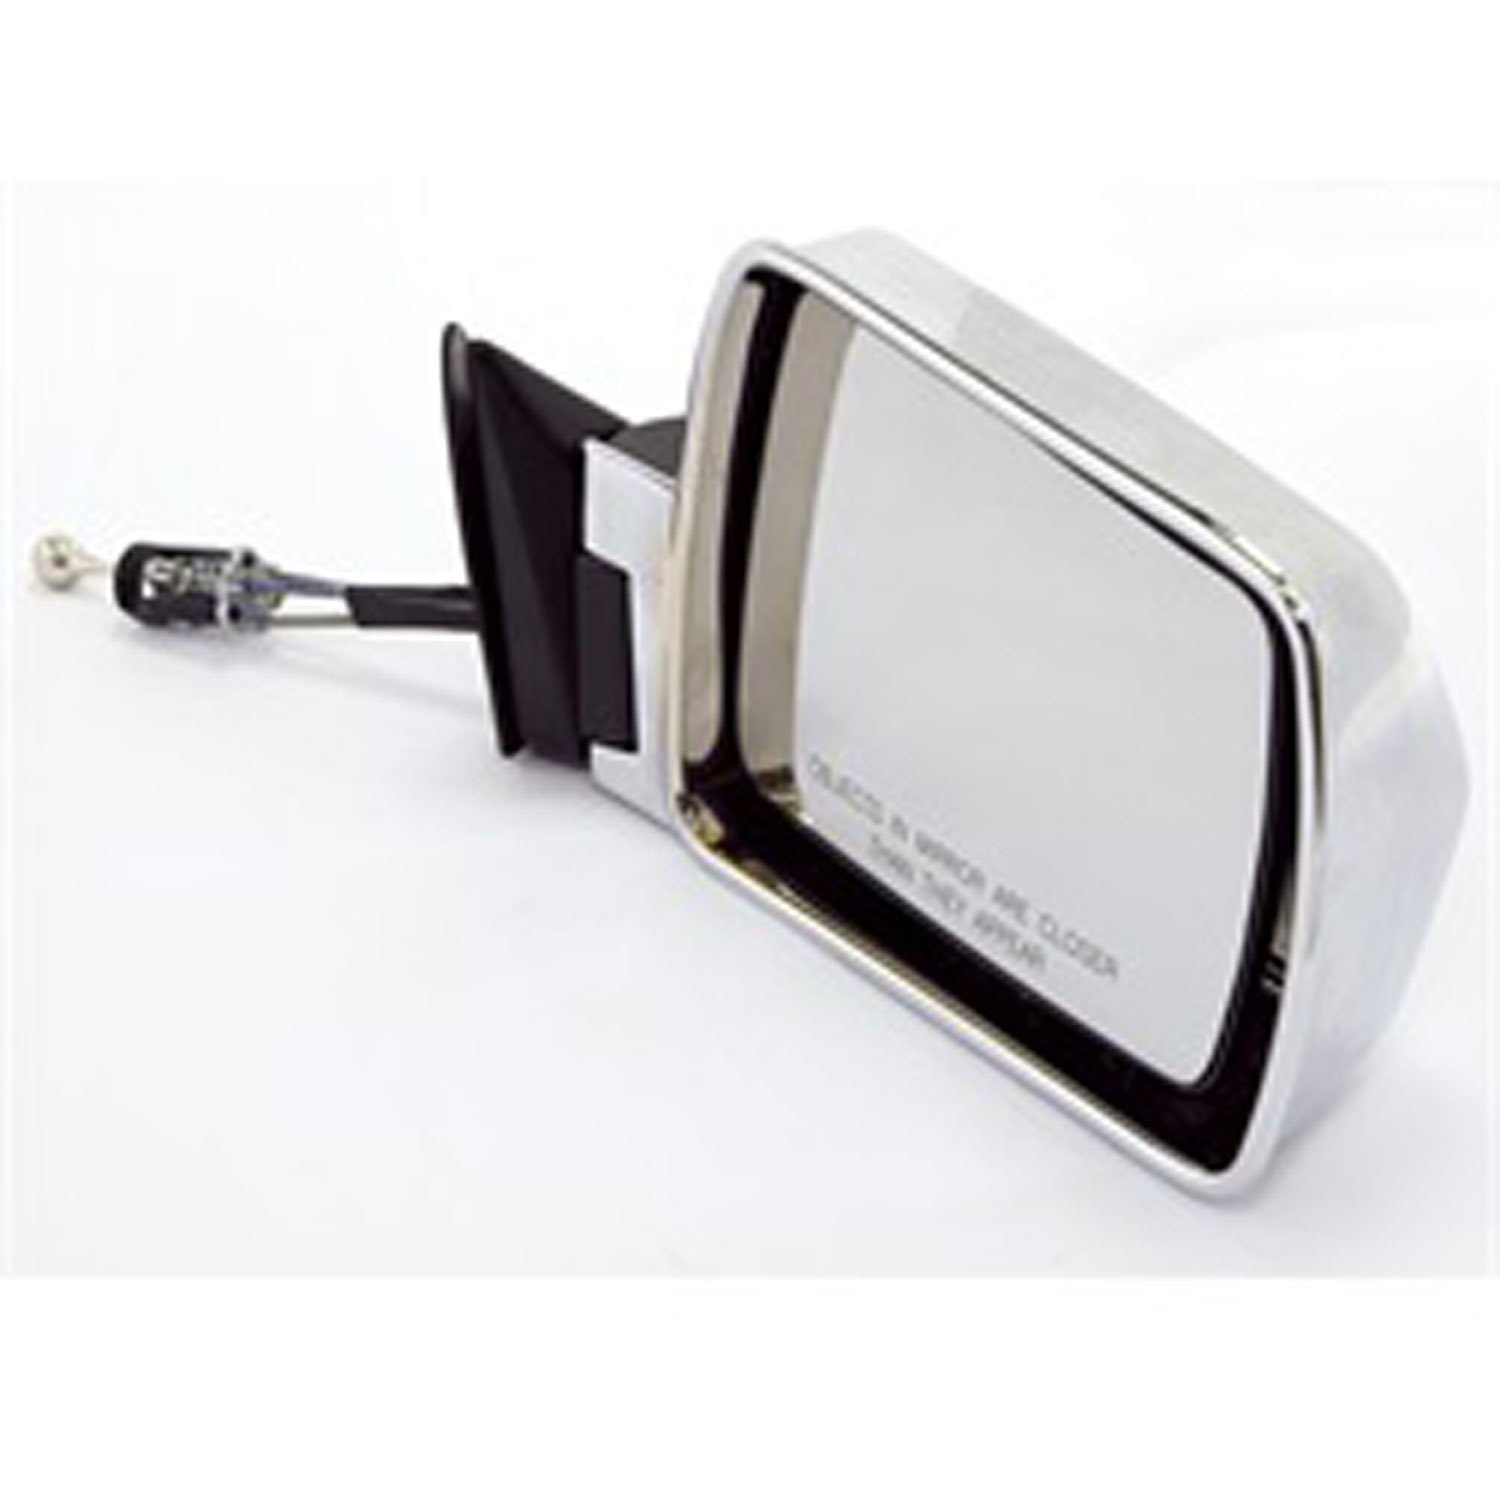 This chrome folding door mirror from Rugged Ridge fits the right door on 84-96 Jeep Cherokee XJ. Con